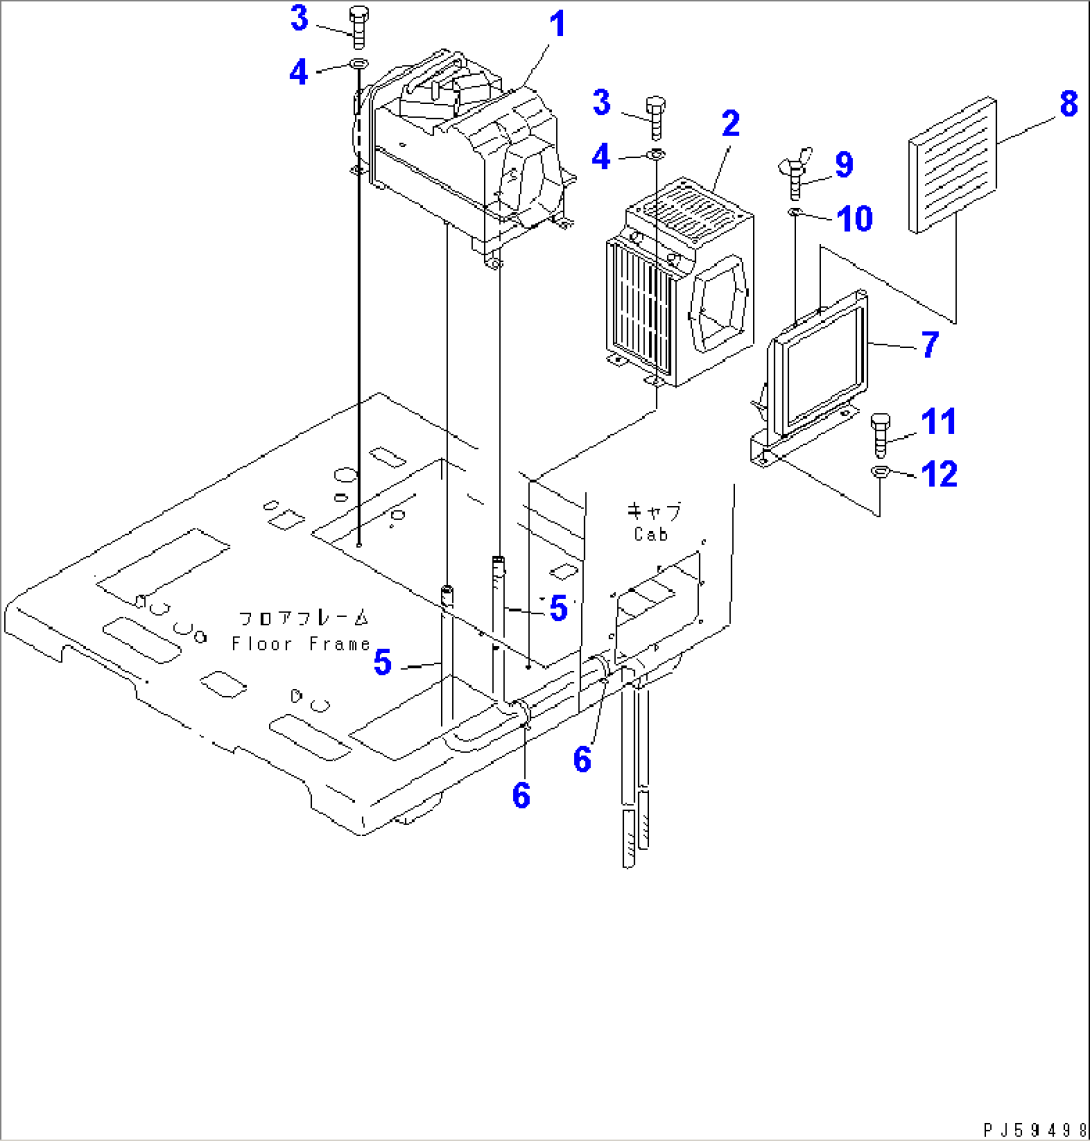 AIR CONDITIONER (1/9) (AIR CONDITIONER UNIT AND RELATED PARTS)